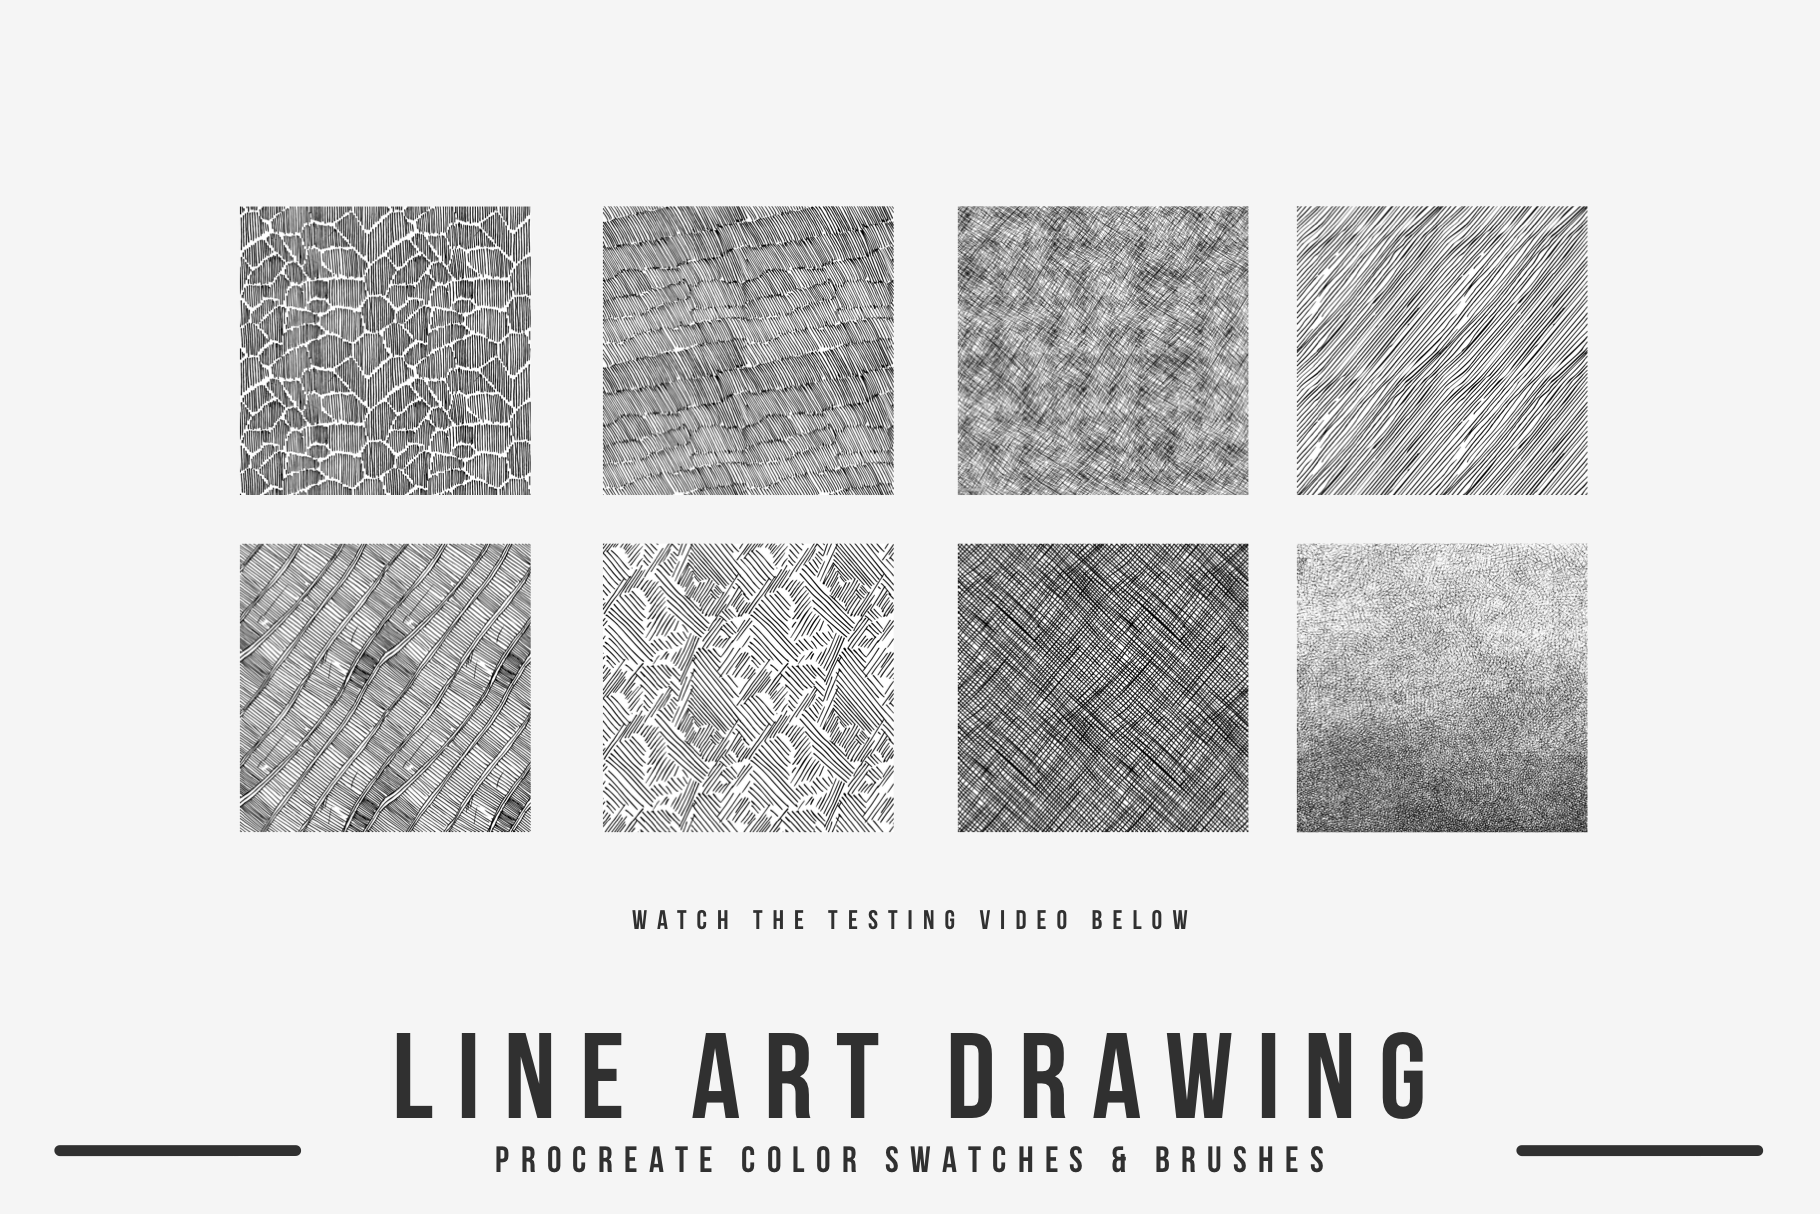 Line Art Drawing Brushes & Color Swatches by Digi Life